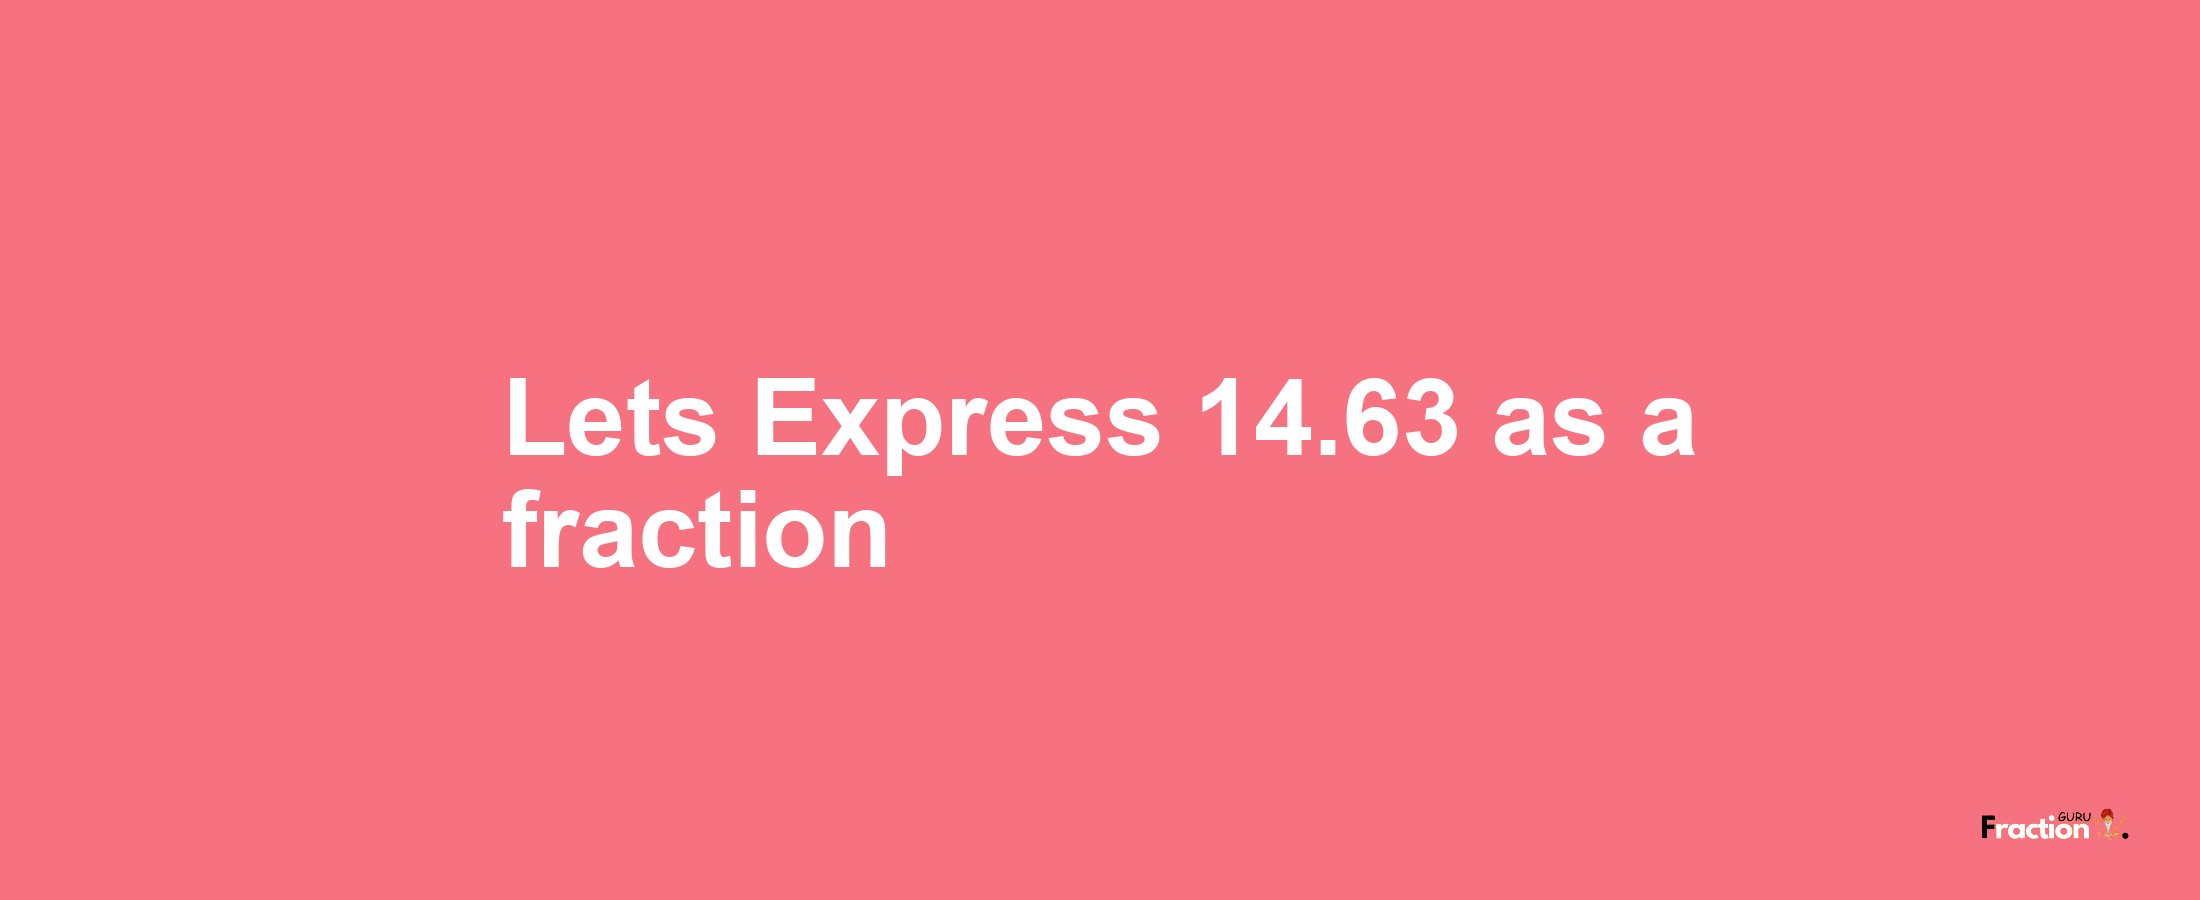 Lets Express 14.63 as afraction